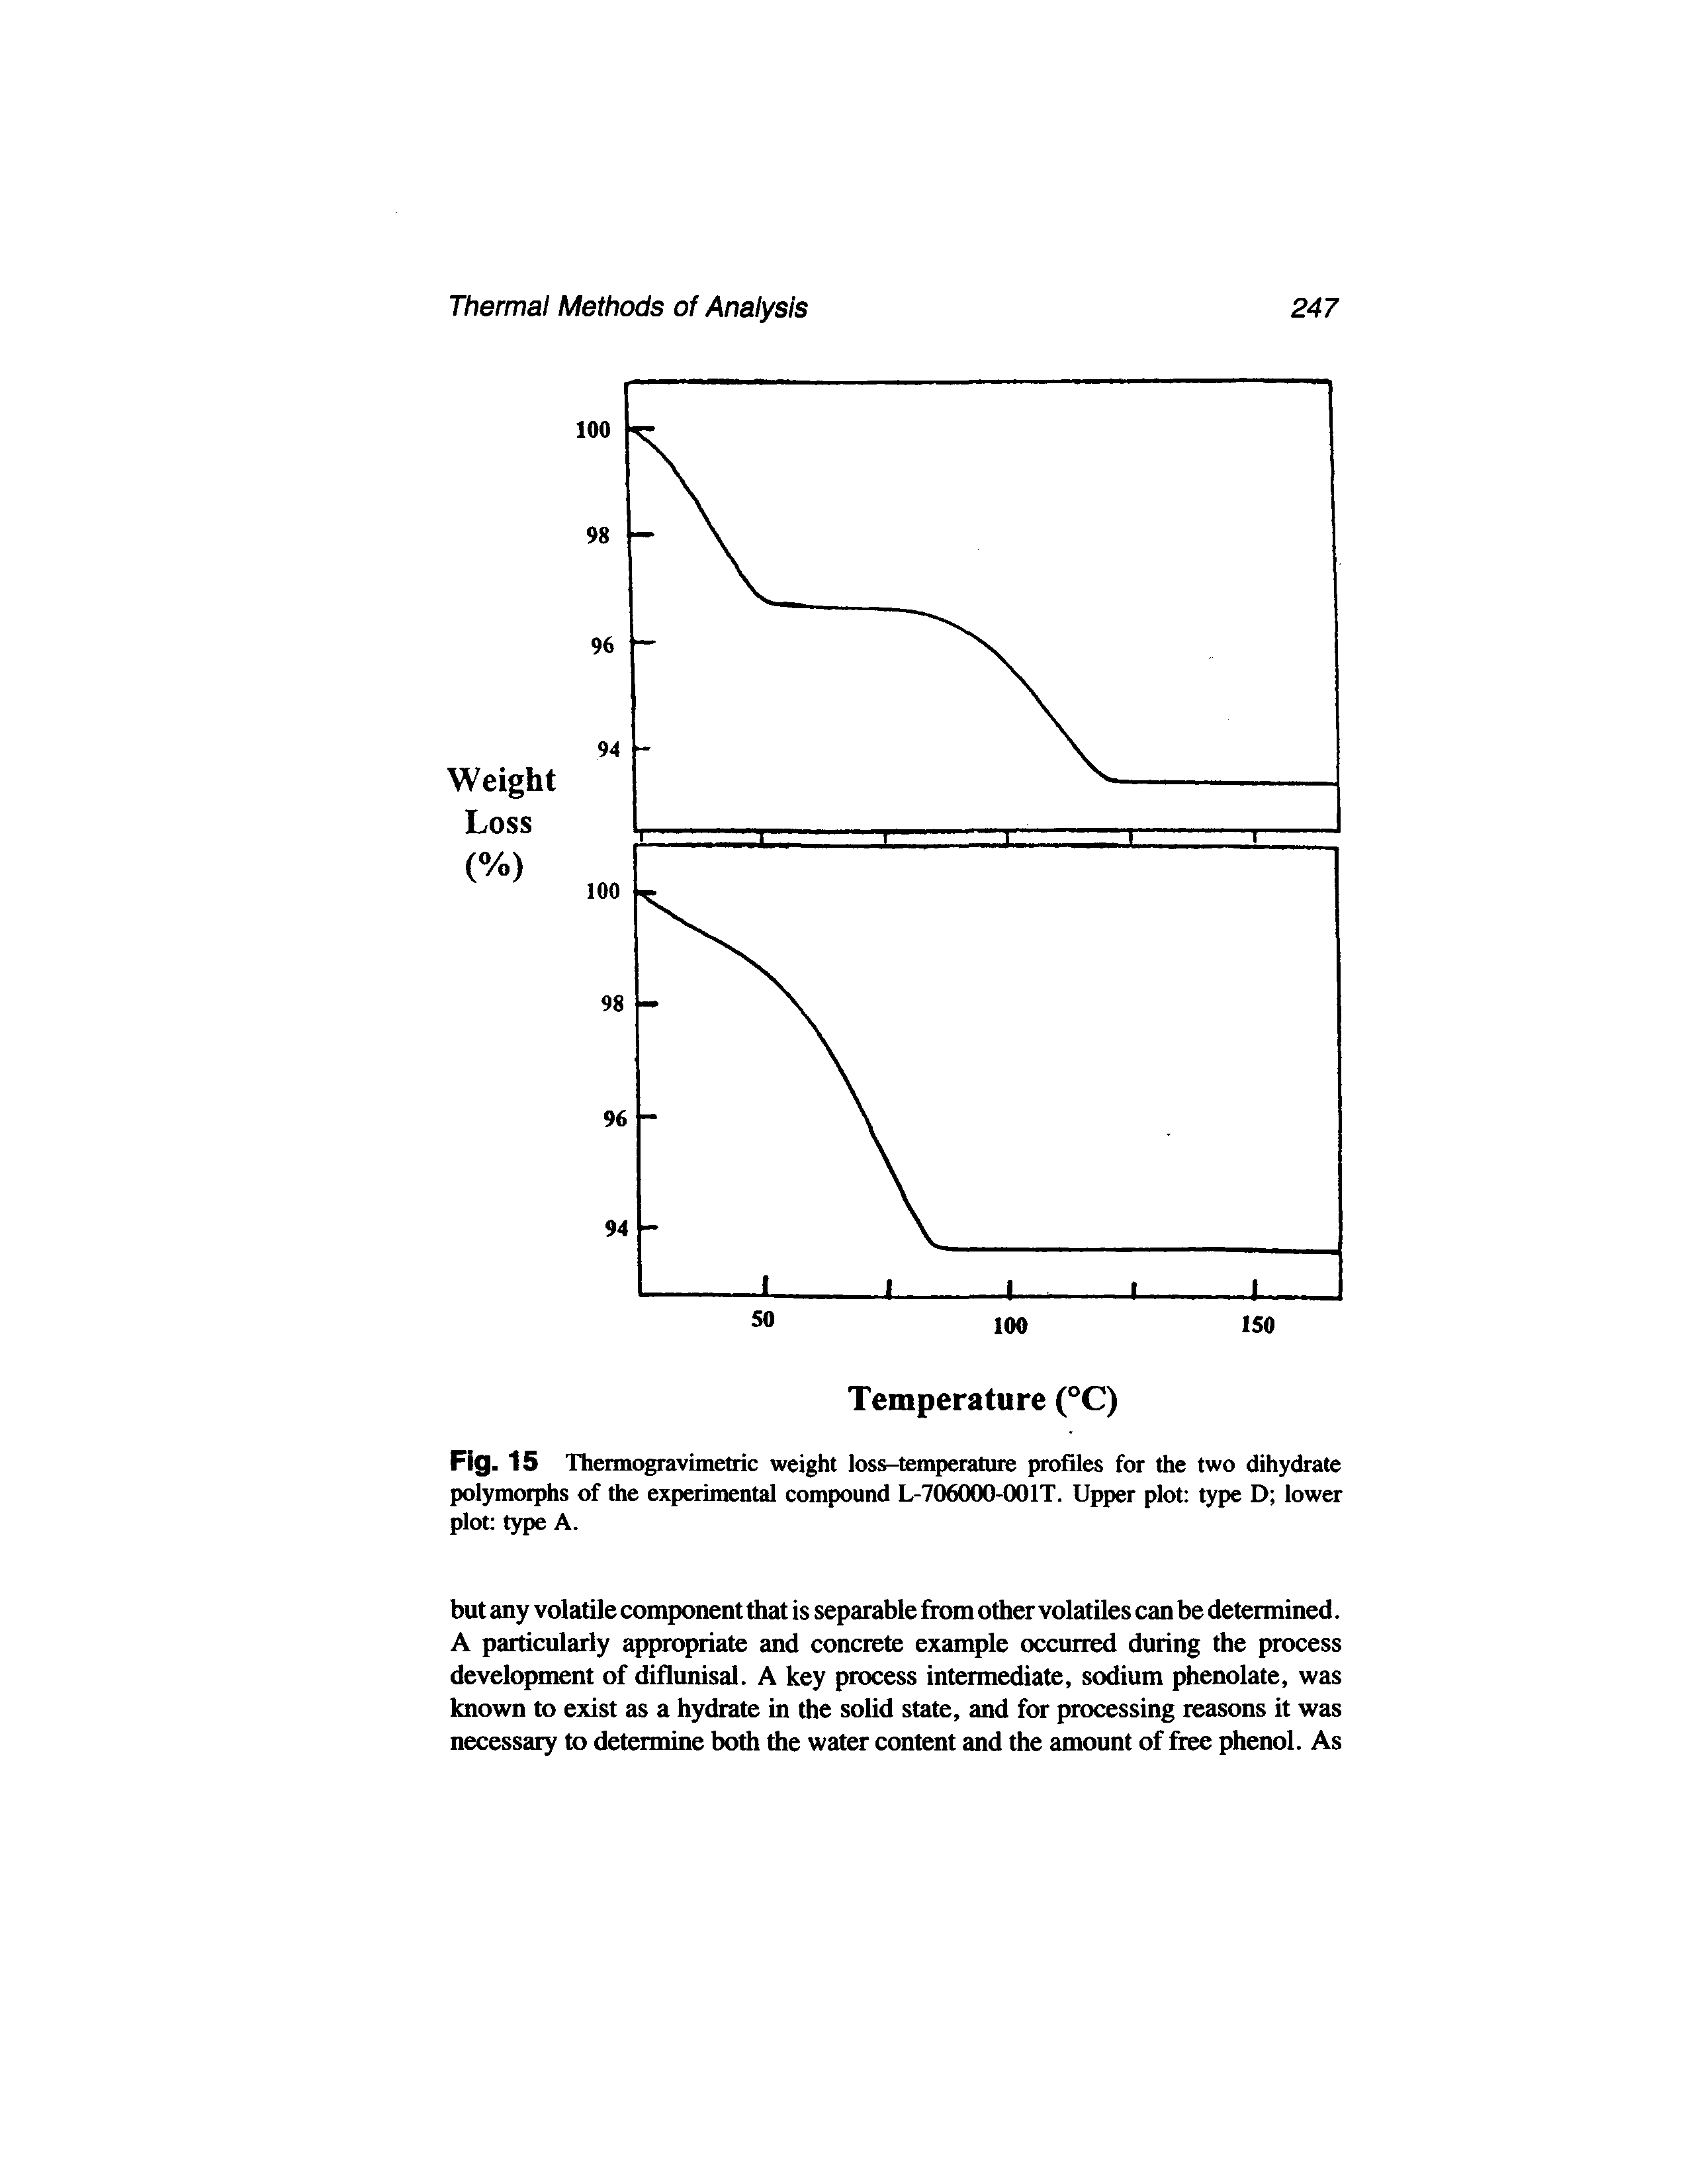 Fig. 15 Thennogravimetric weight loss-temperature profiles for the two dihydrate polymorphs of the experimental compound L-706000-001T. Upper plot type D lower plot type A.